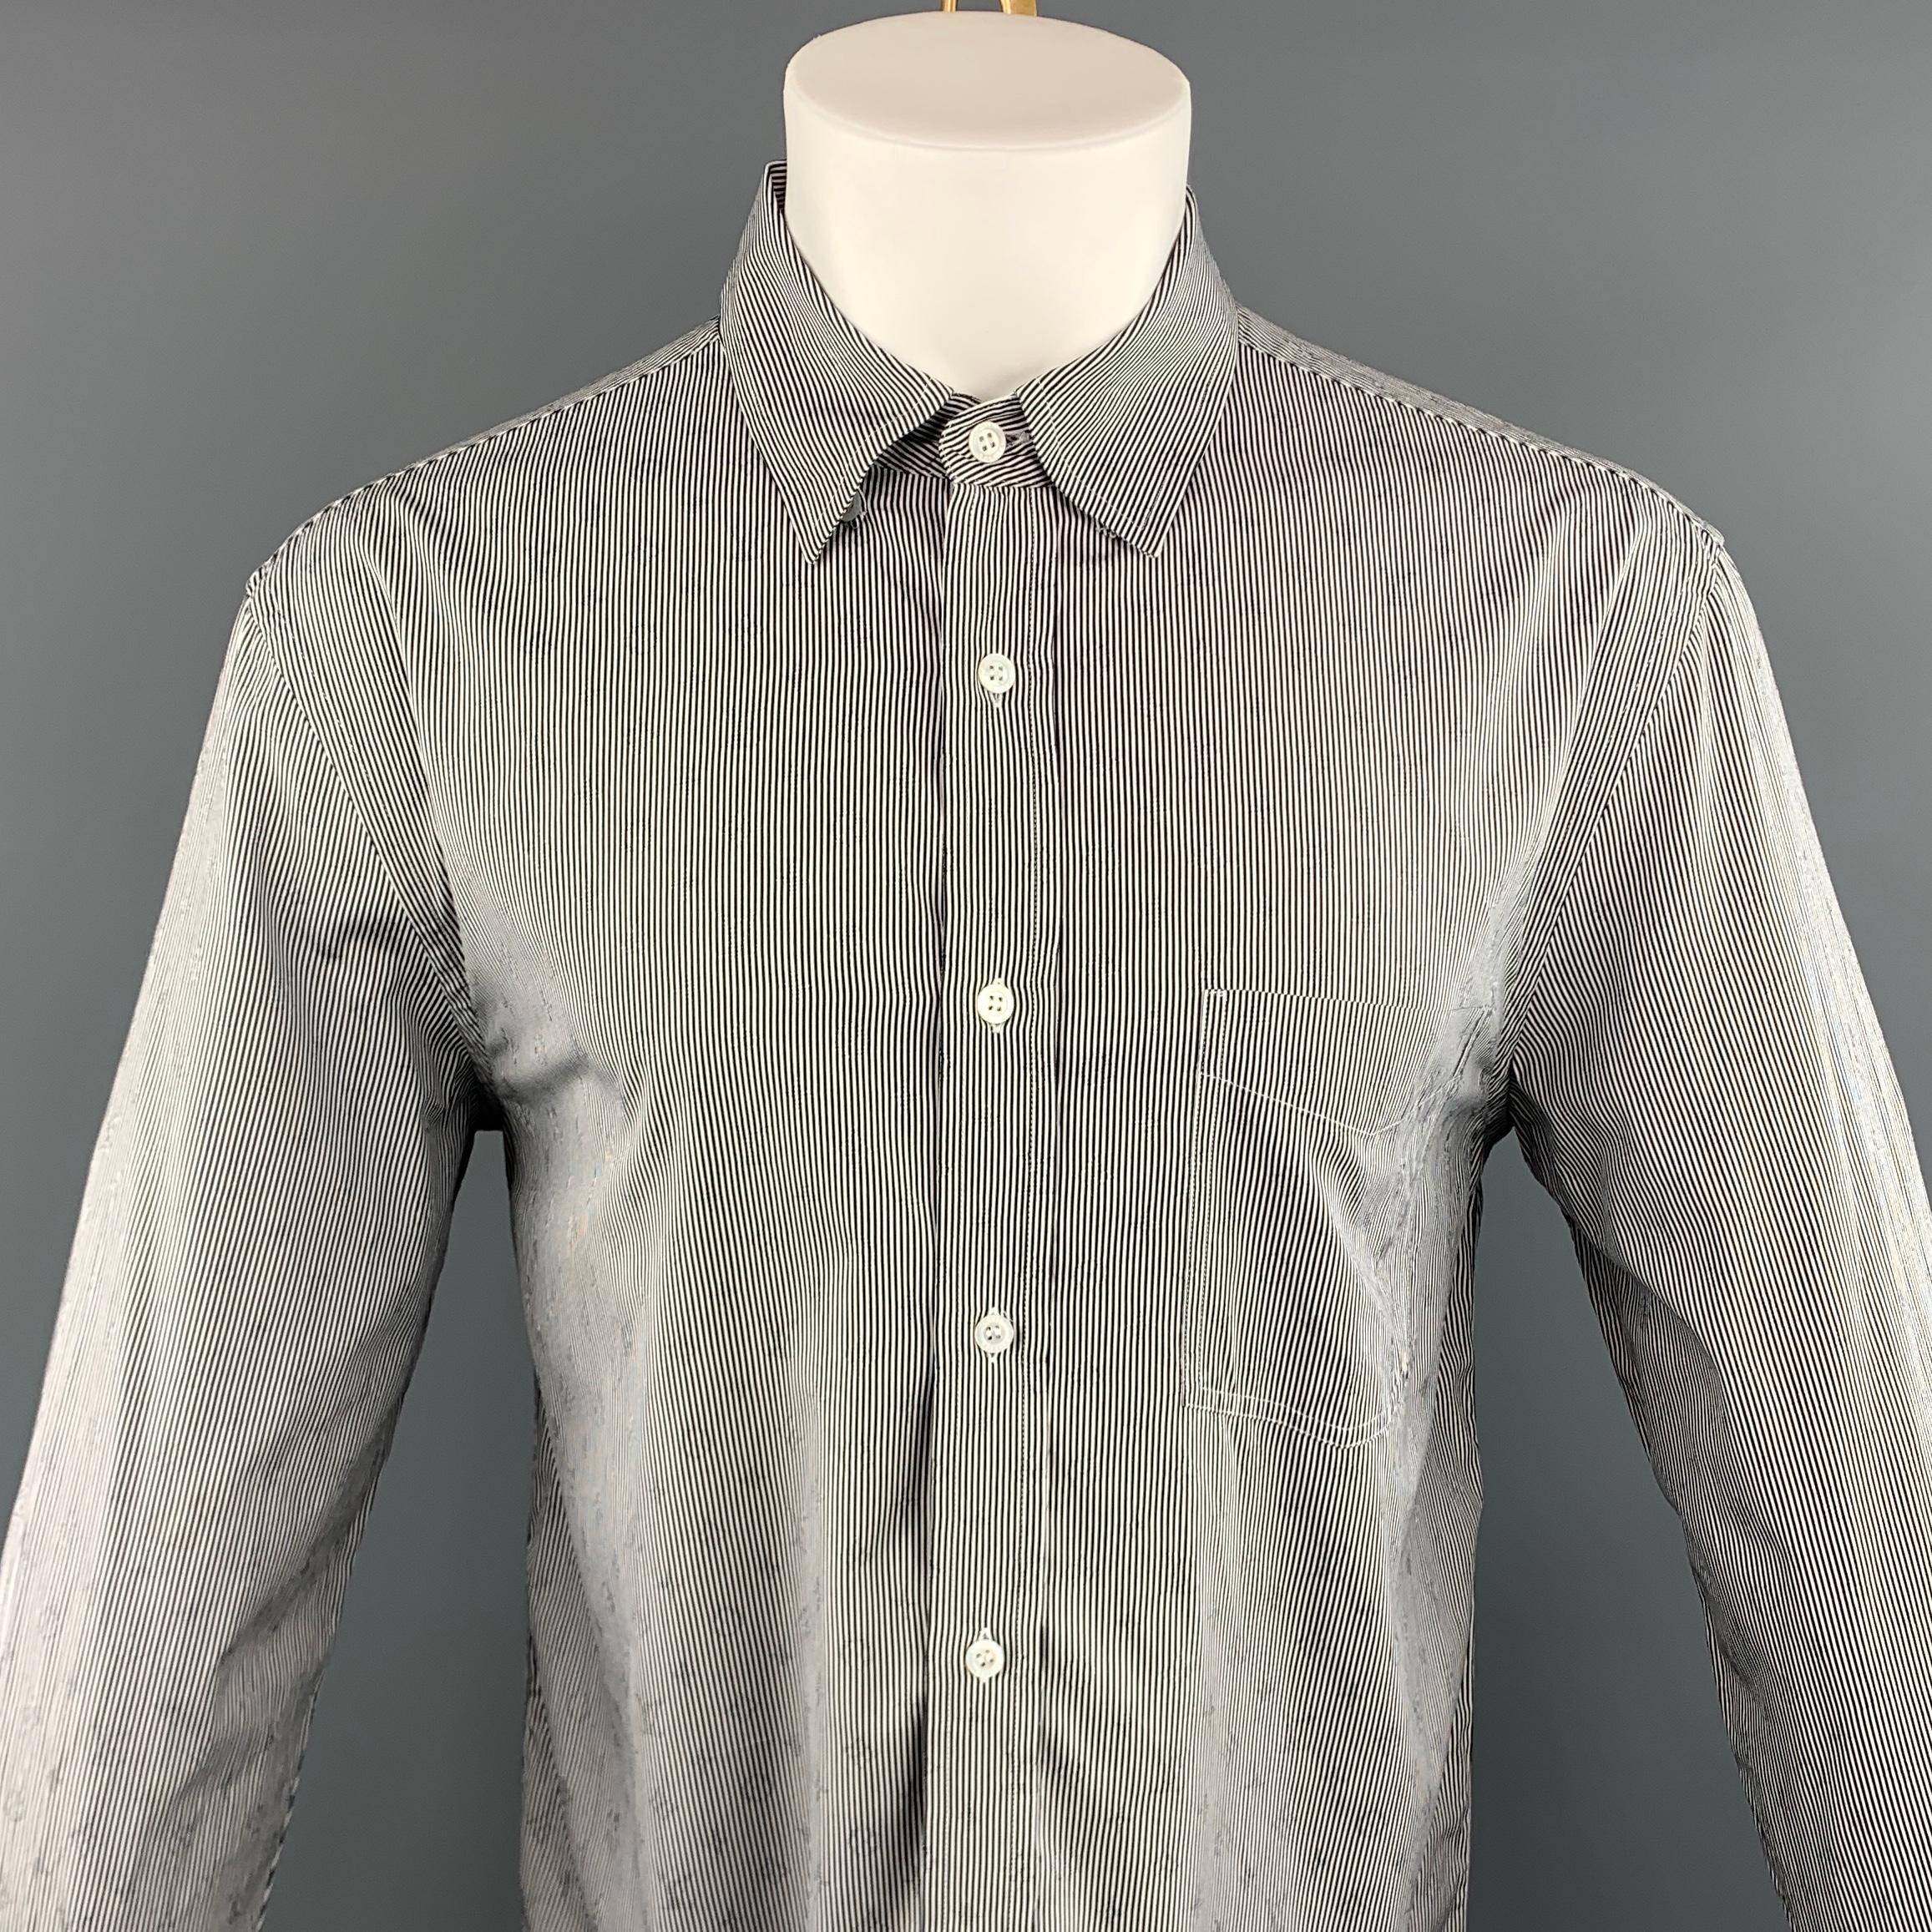 LOUIS VUITTON long sleeve shirt comes in a white and black striped cotton featuring a monogram detail throughout, button up style, spread collar, and a front patch pocket. Made in Italy.
 
Excellent Pre-Owned Condition.
Marked: L
 
Measurements:
